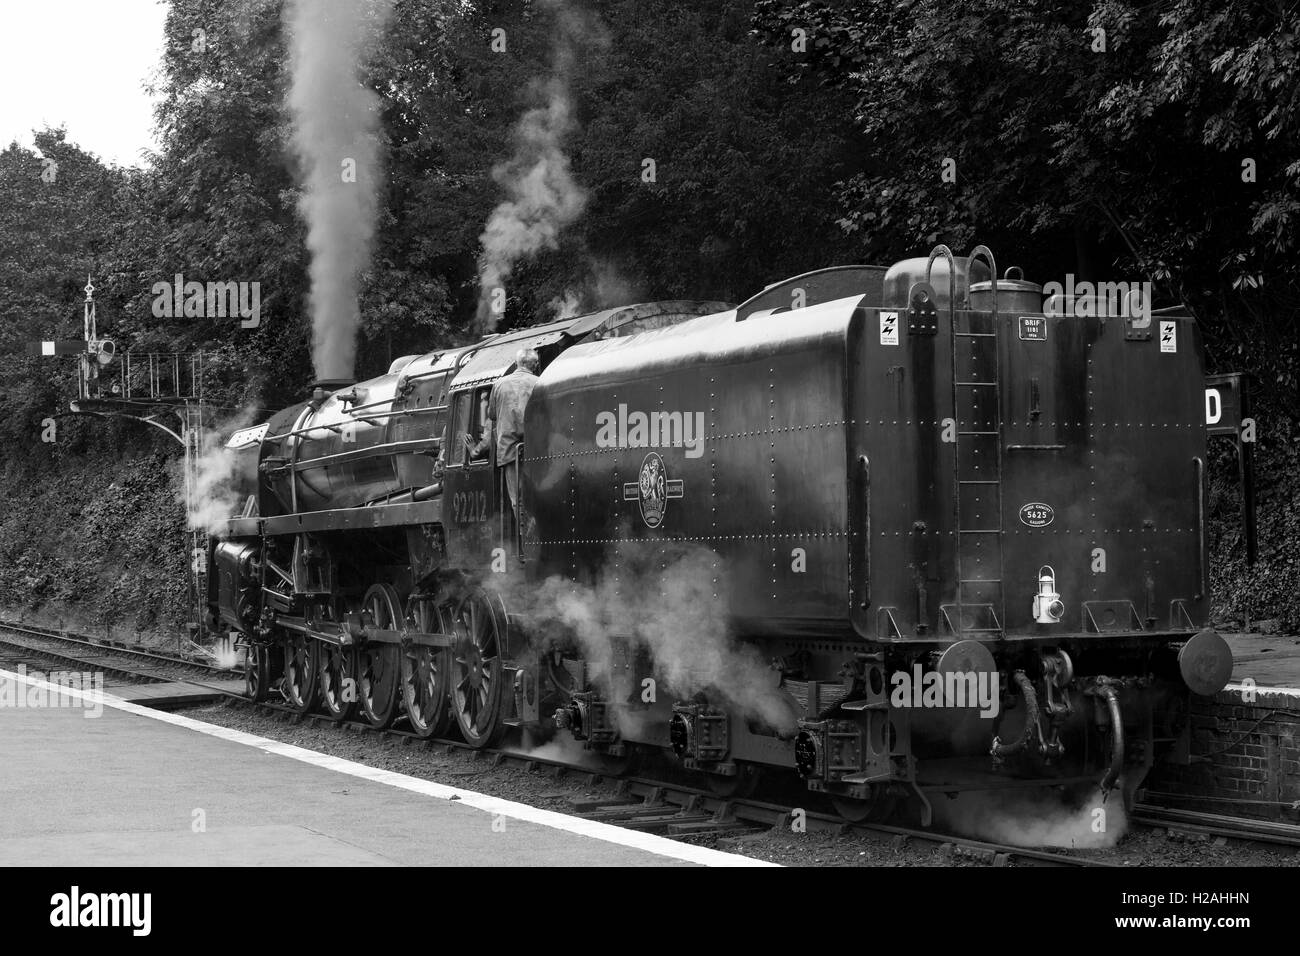 Vintage Standard Class 9F steam train in monochrome. Train under full steam with the engineers in shot with backs to the camera. Stock Photo